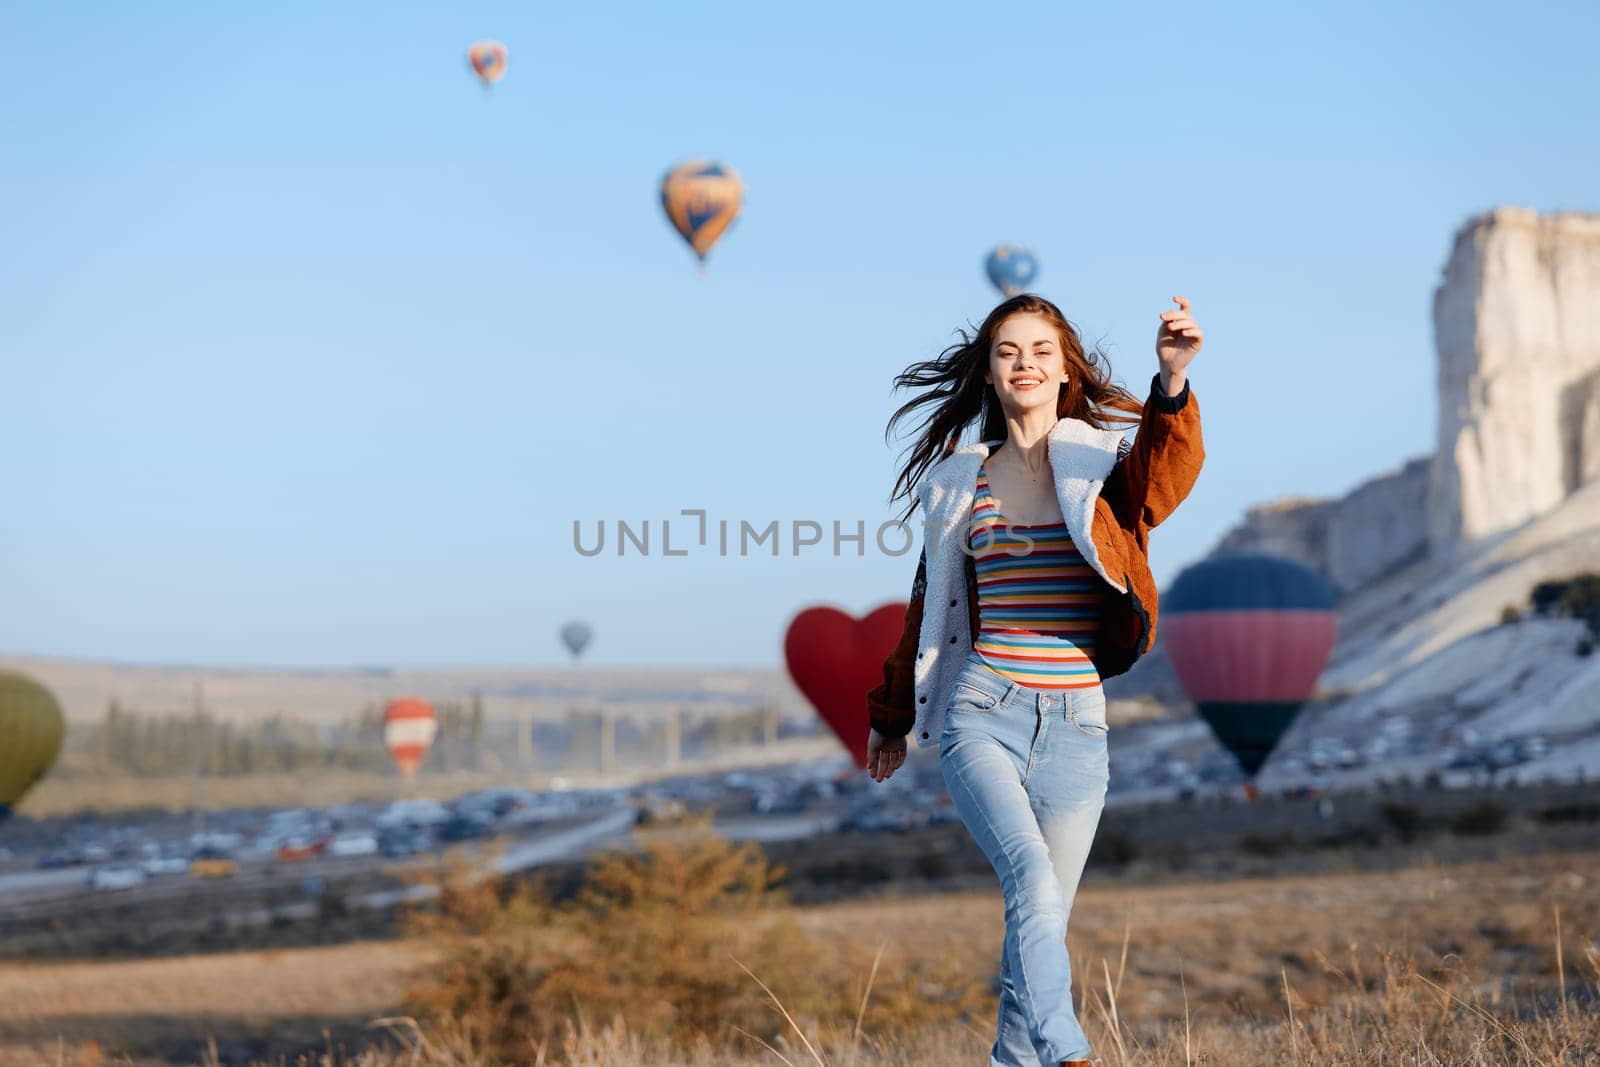 Carefree young woman captures moment in field with balloons and mountain backdrop